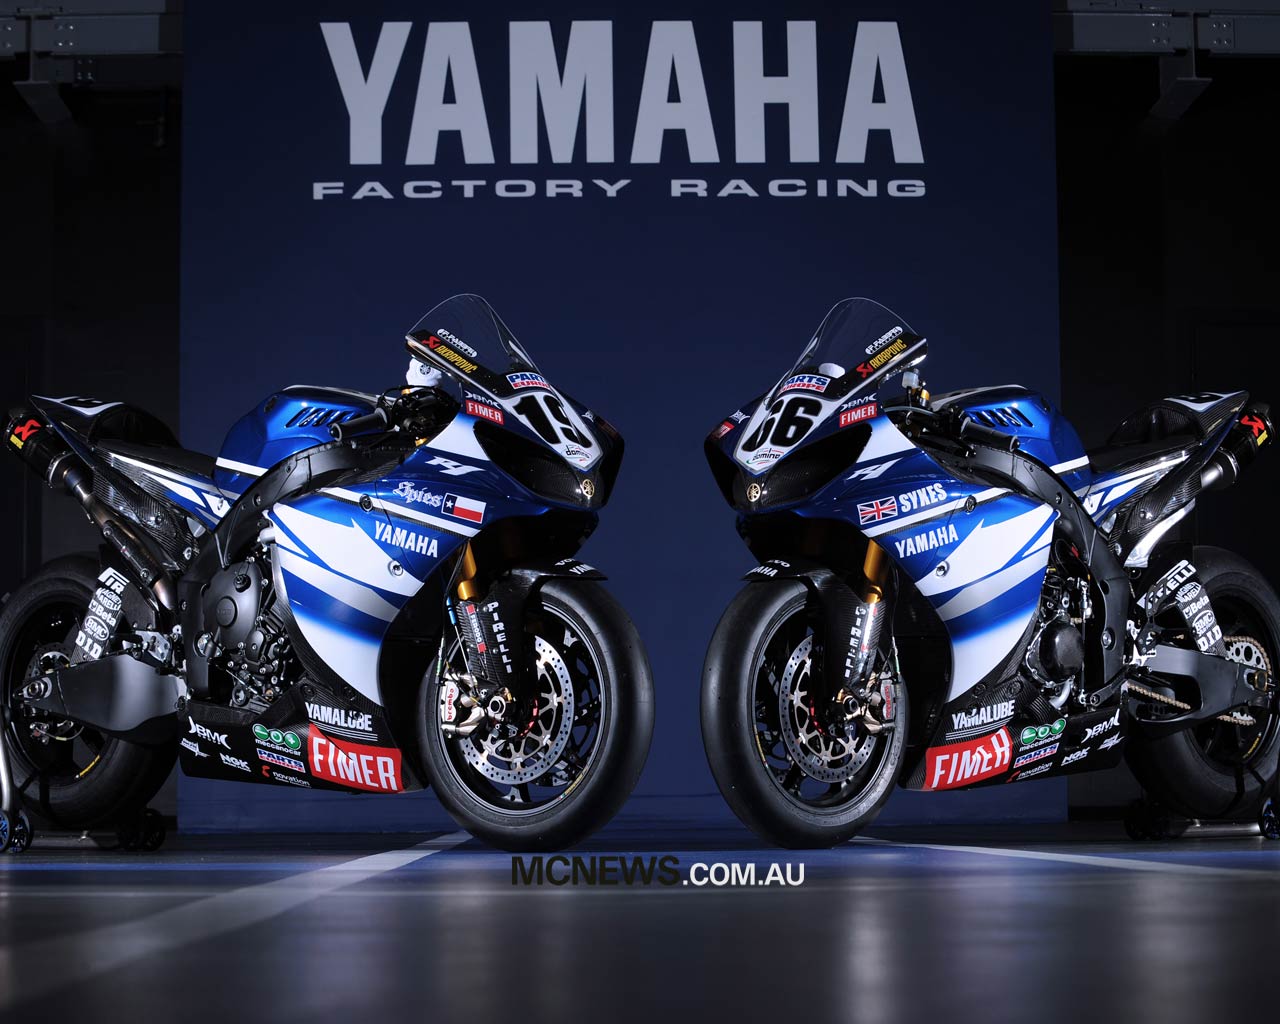 Cute HD Pictures: Wallpaper Yamaha